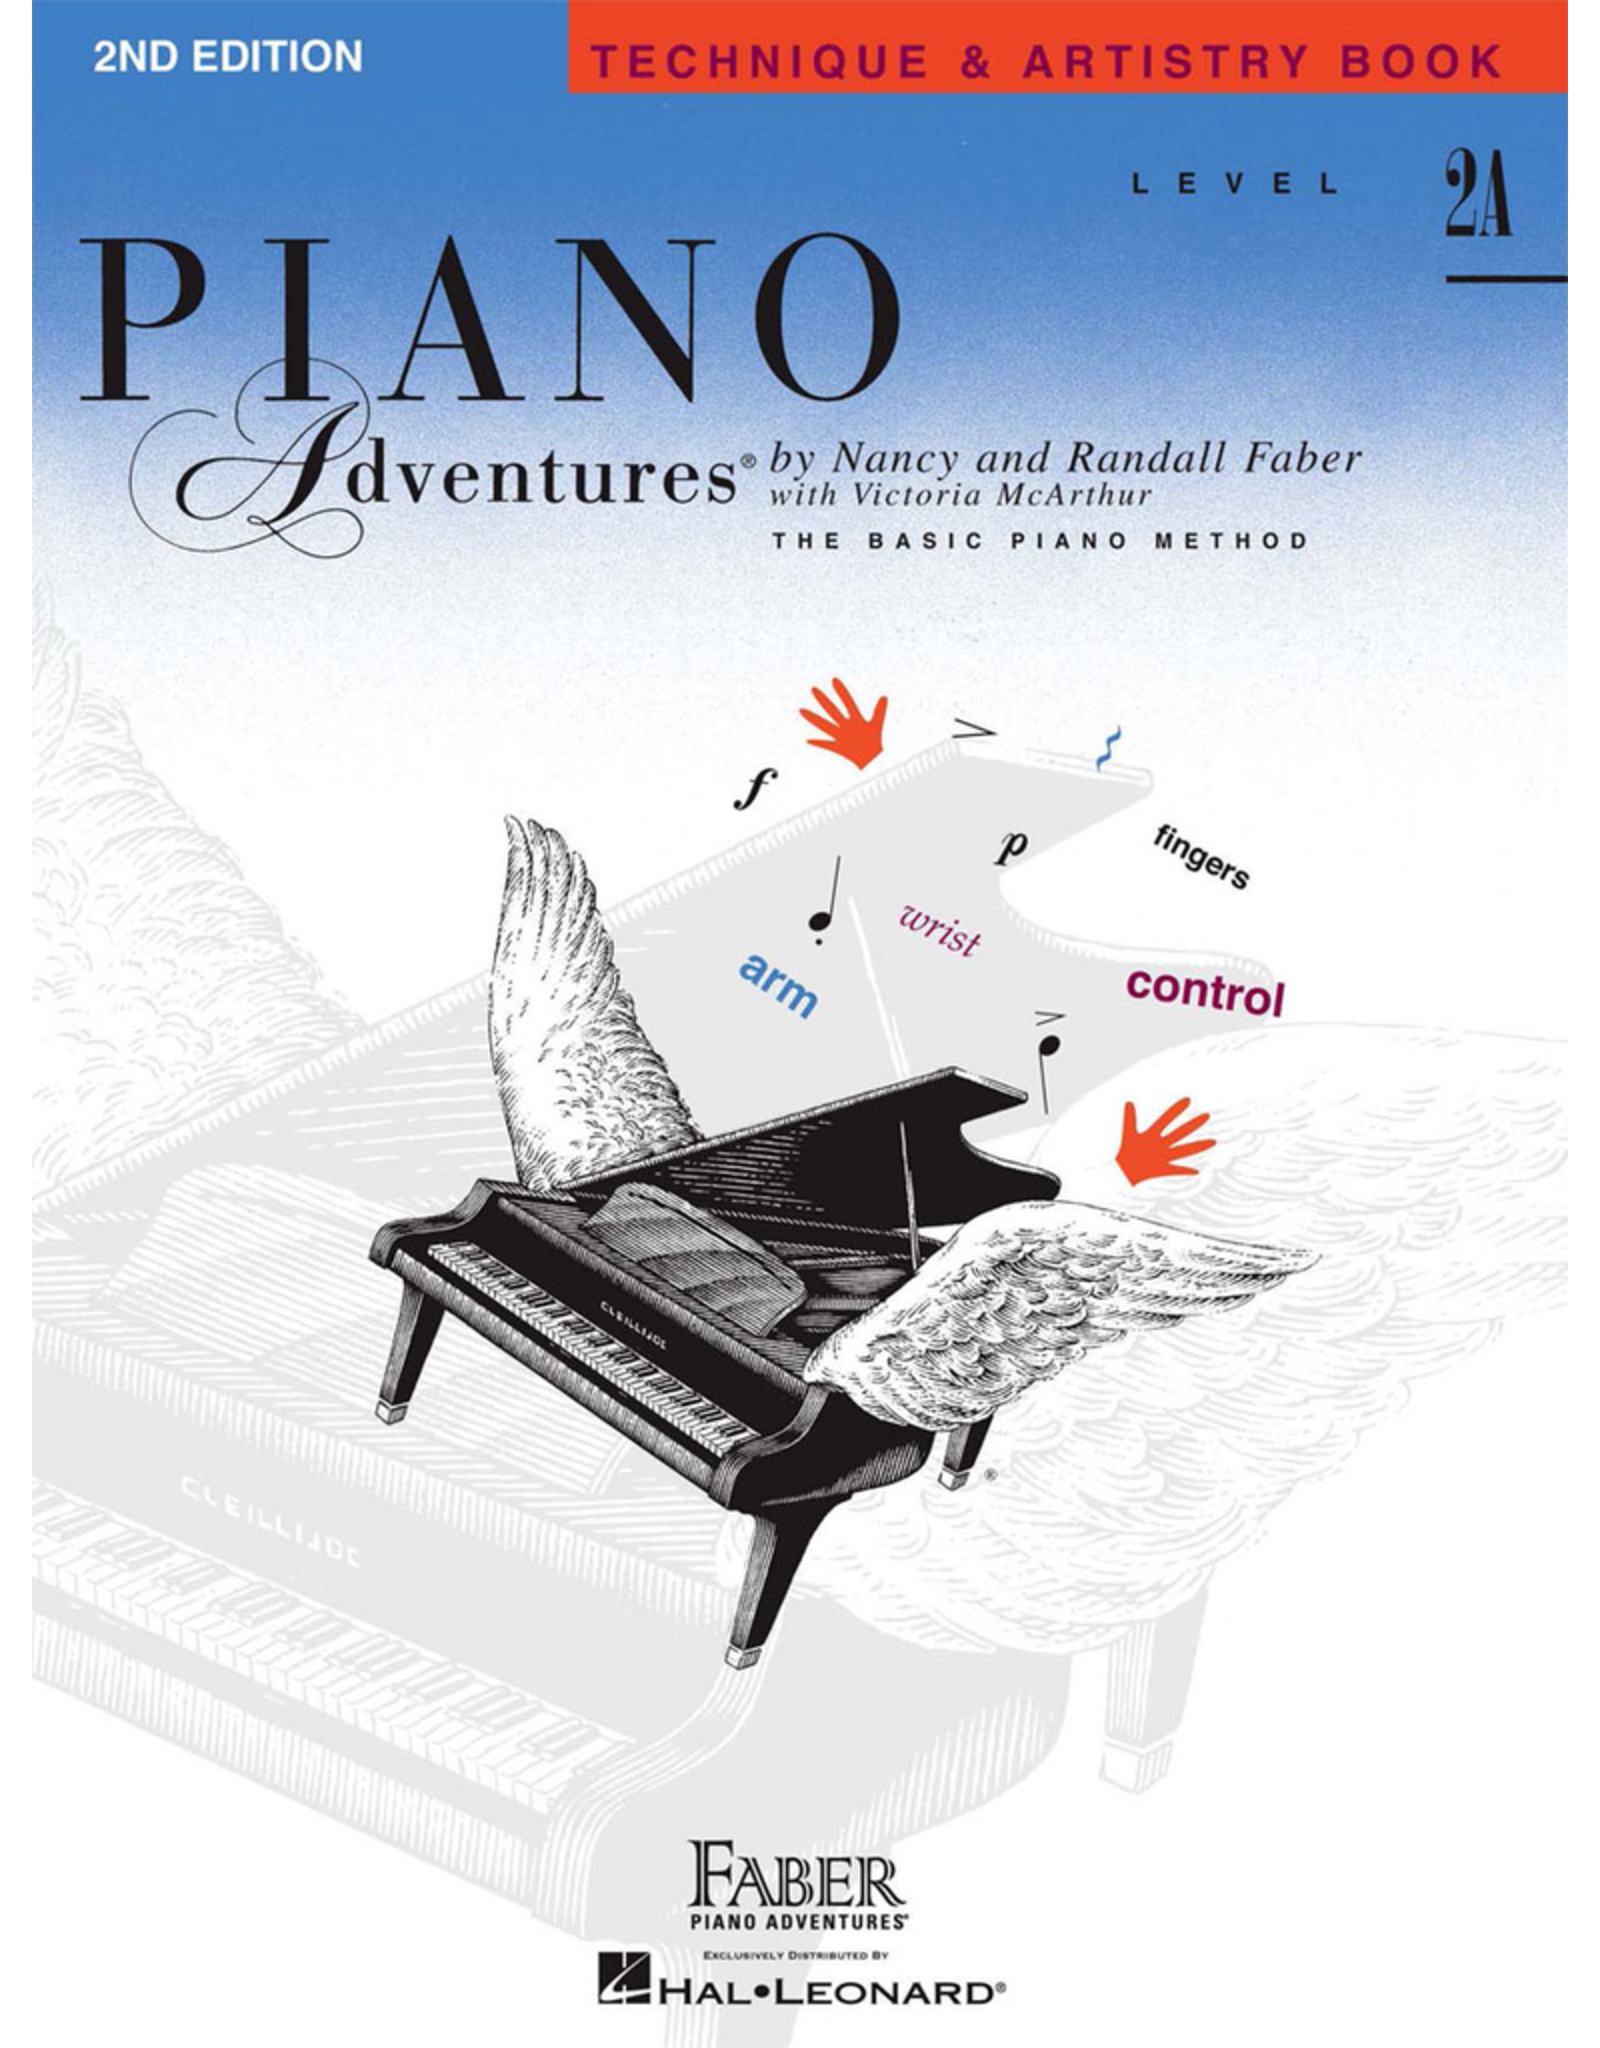 Hal Leonard Piano Adventures Technique and Artistry Level 2A *